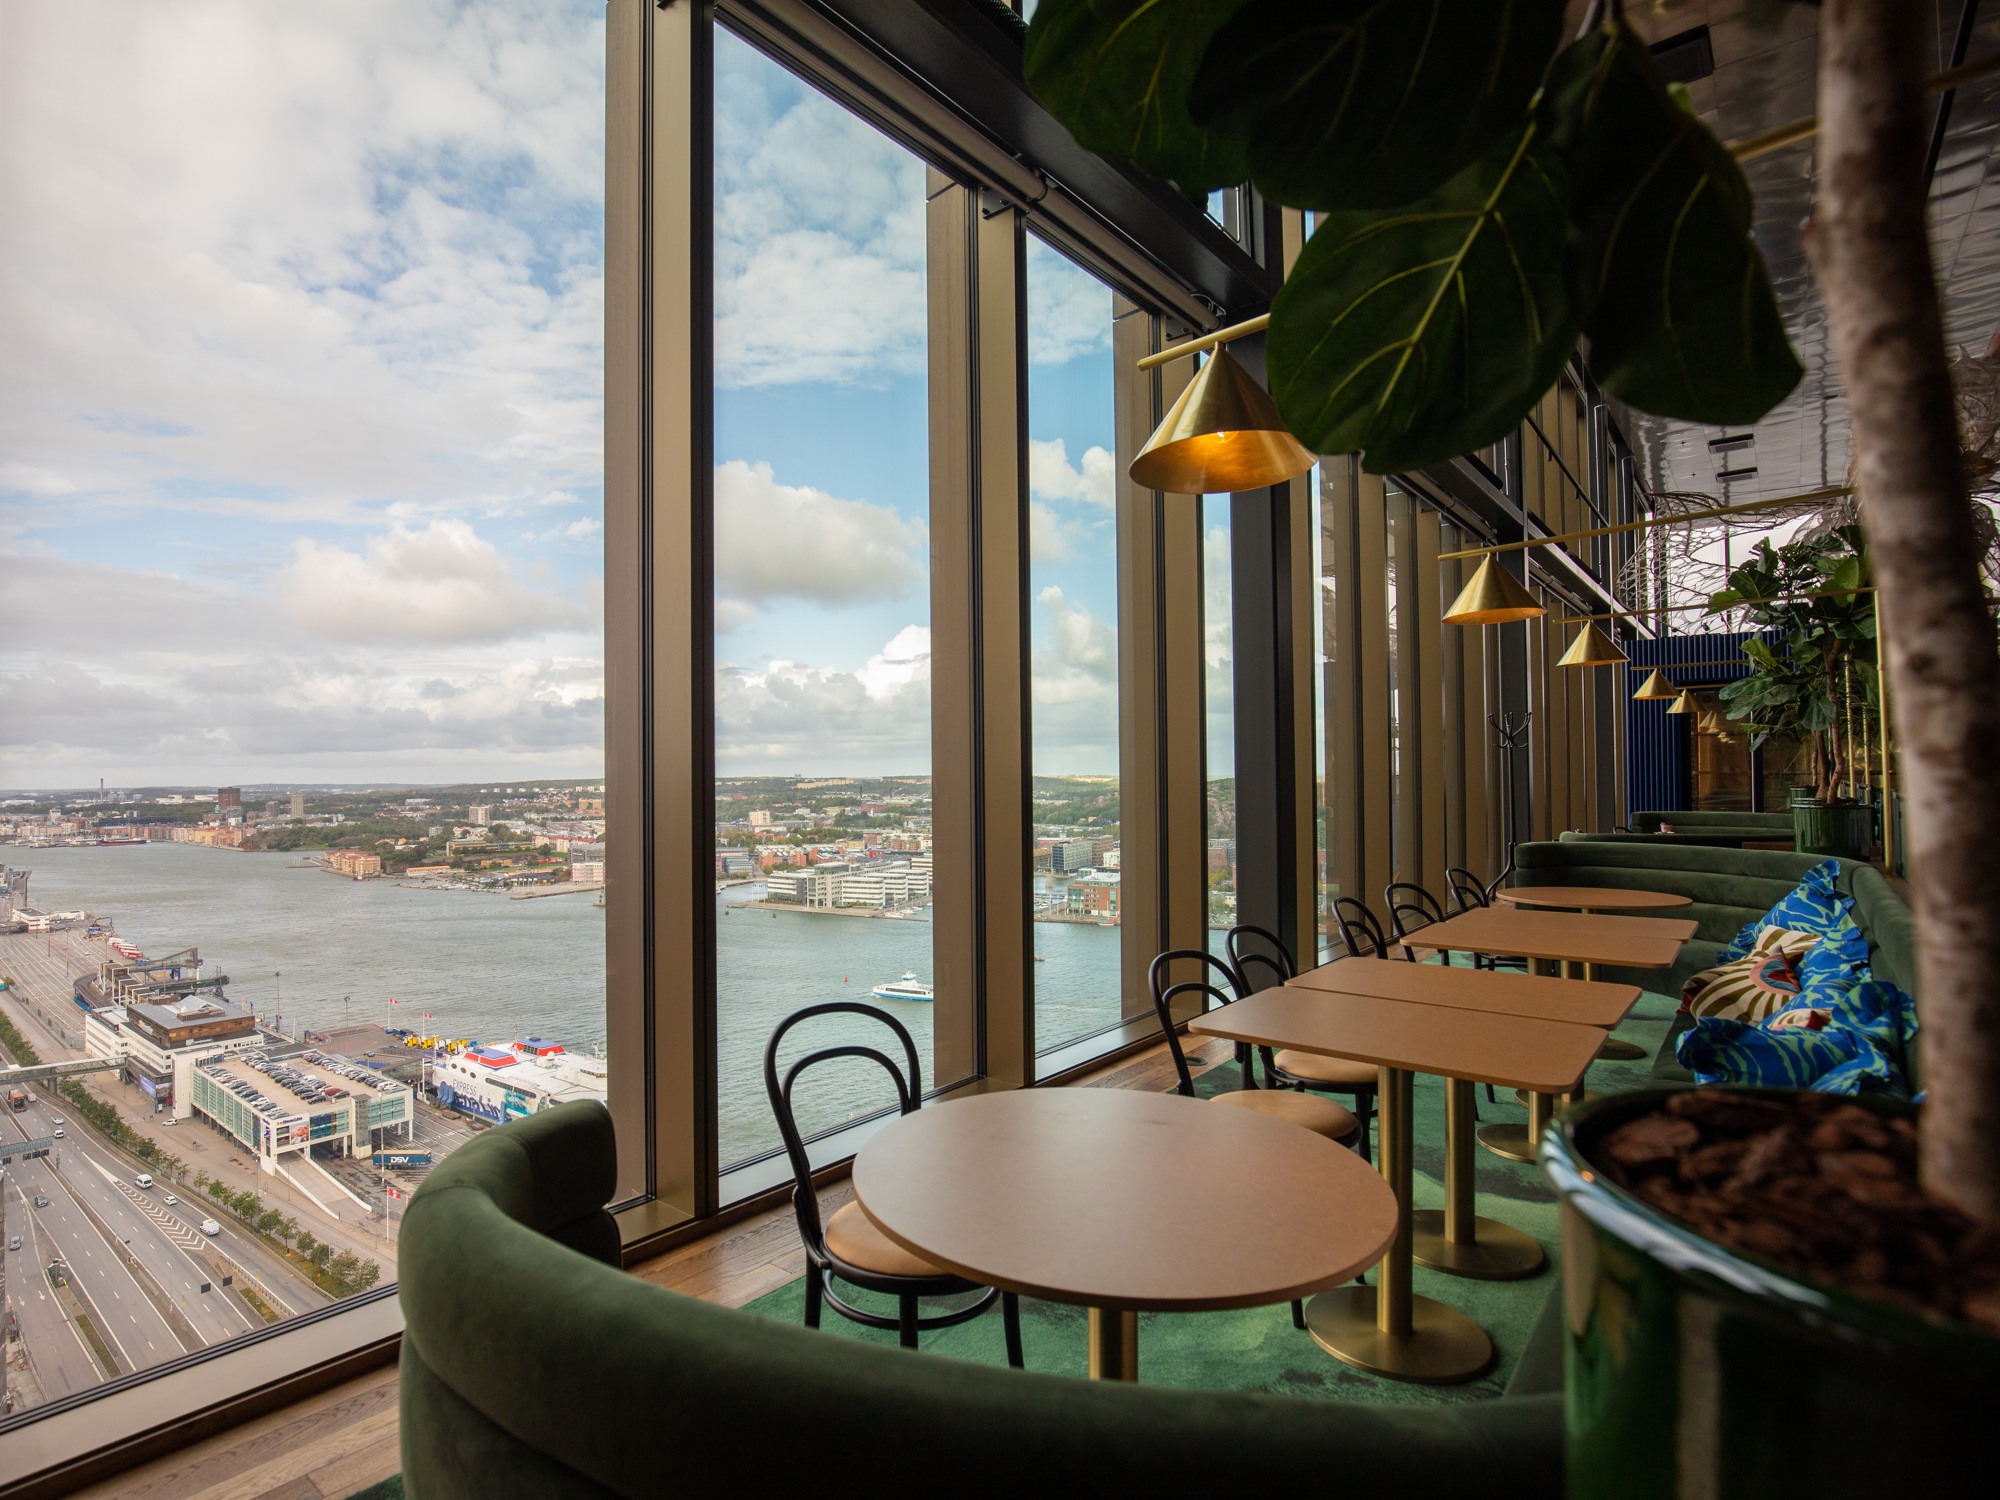 Windows at the restaurant Brasserie Draken with a view of the Gothenburg harbour.